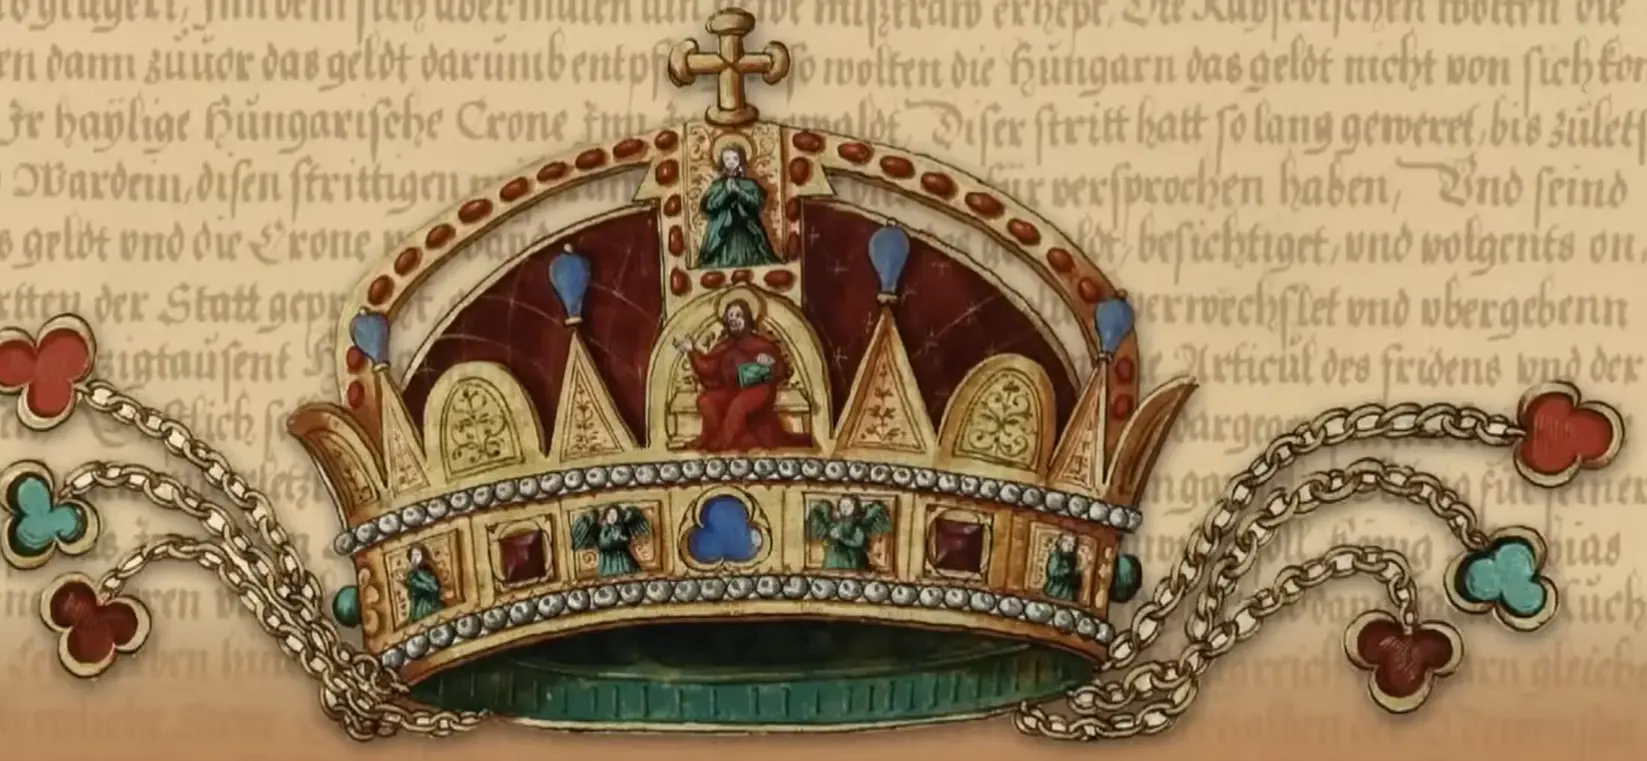 First image of Hungary's Holy Crown found in a Medieval German codex